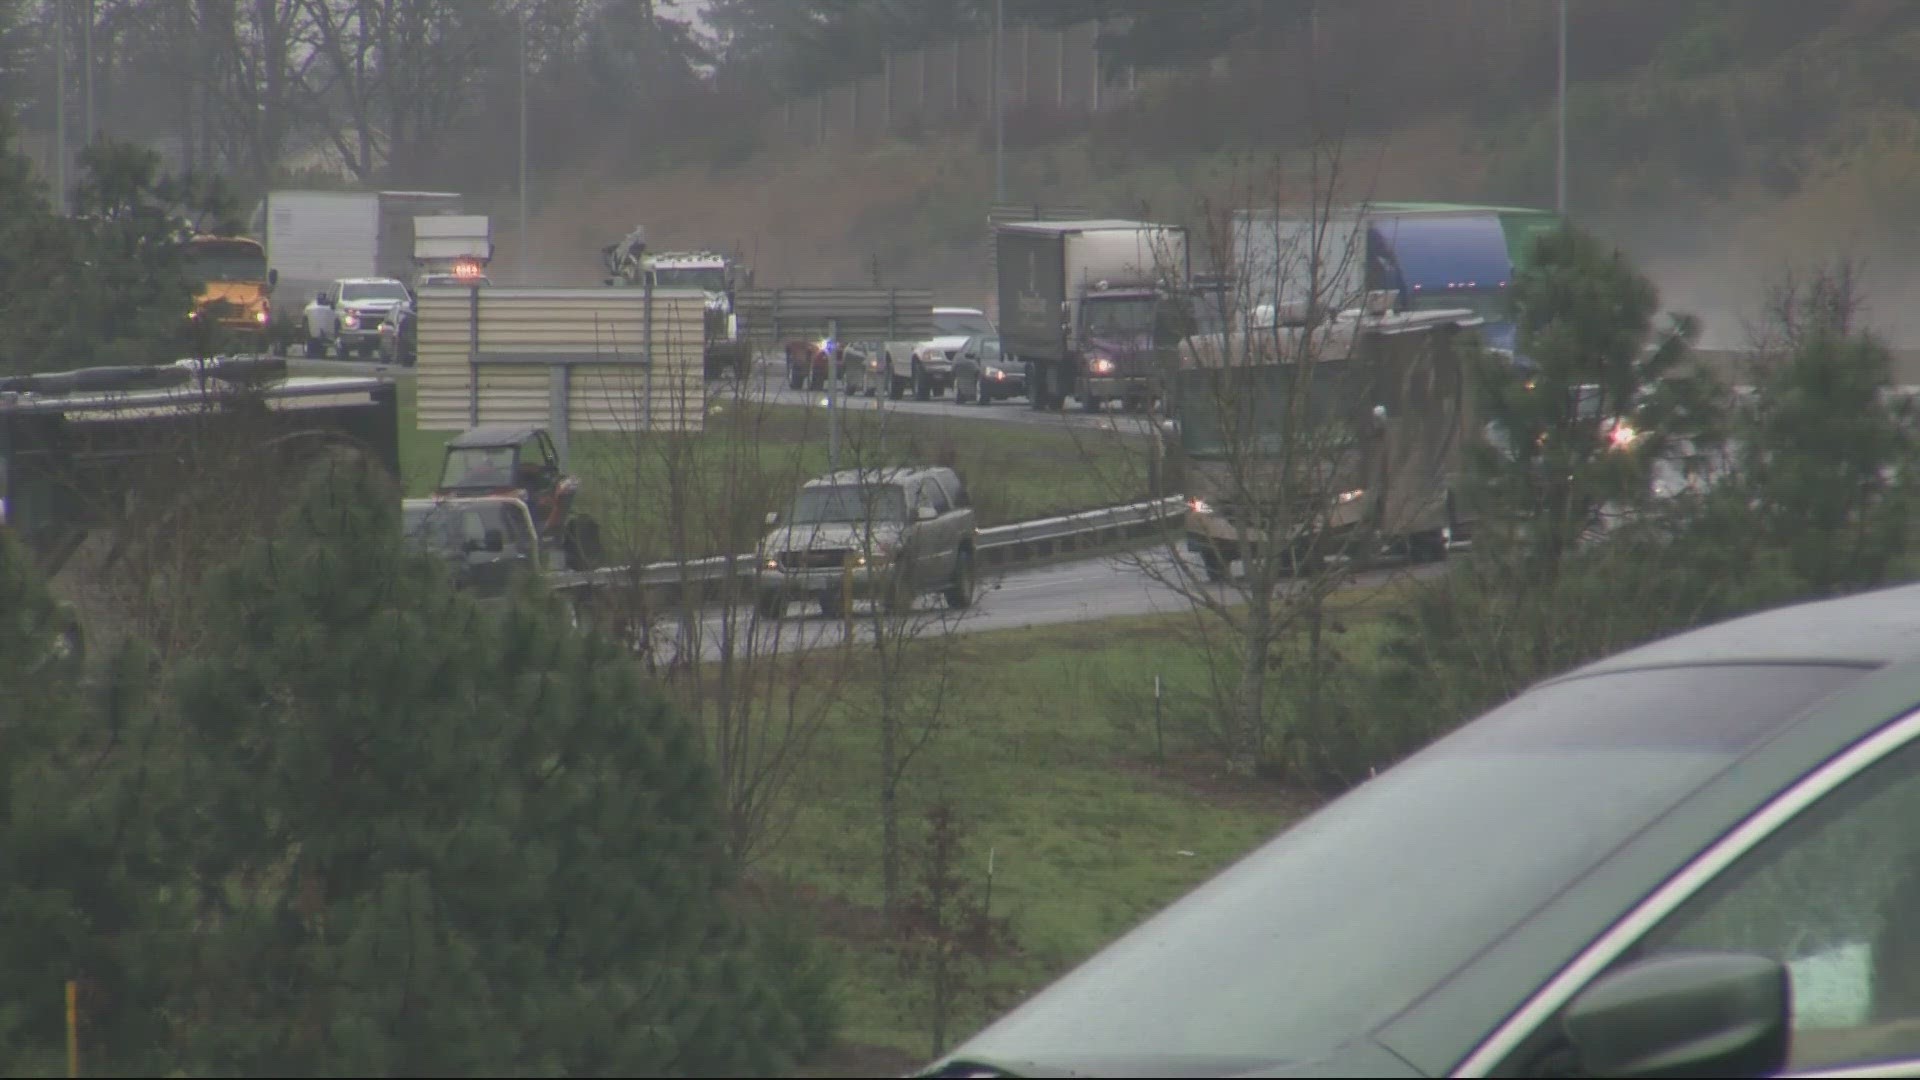 Oregon State Police said a trooper was involved in a "critical incident" Monday morning on I-5 northbound. The suspect had died following a shooting